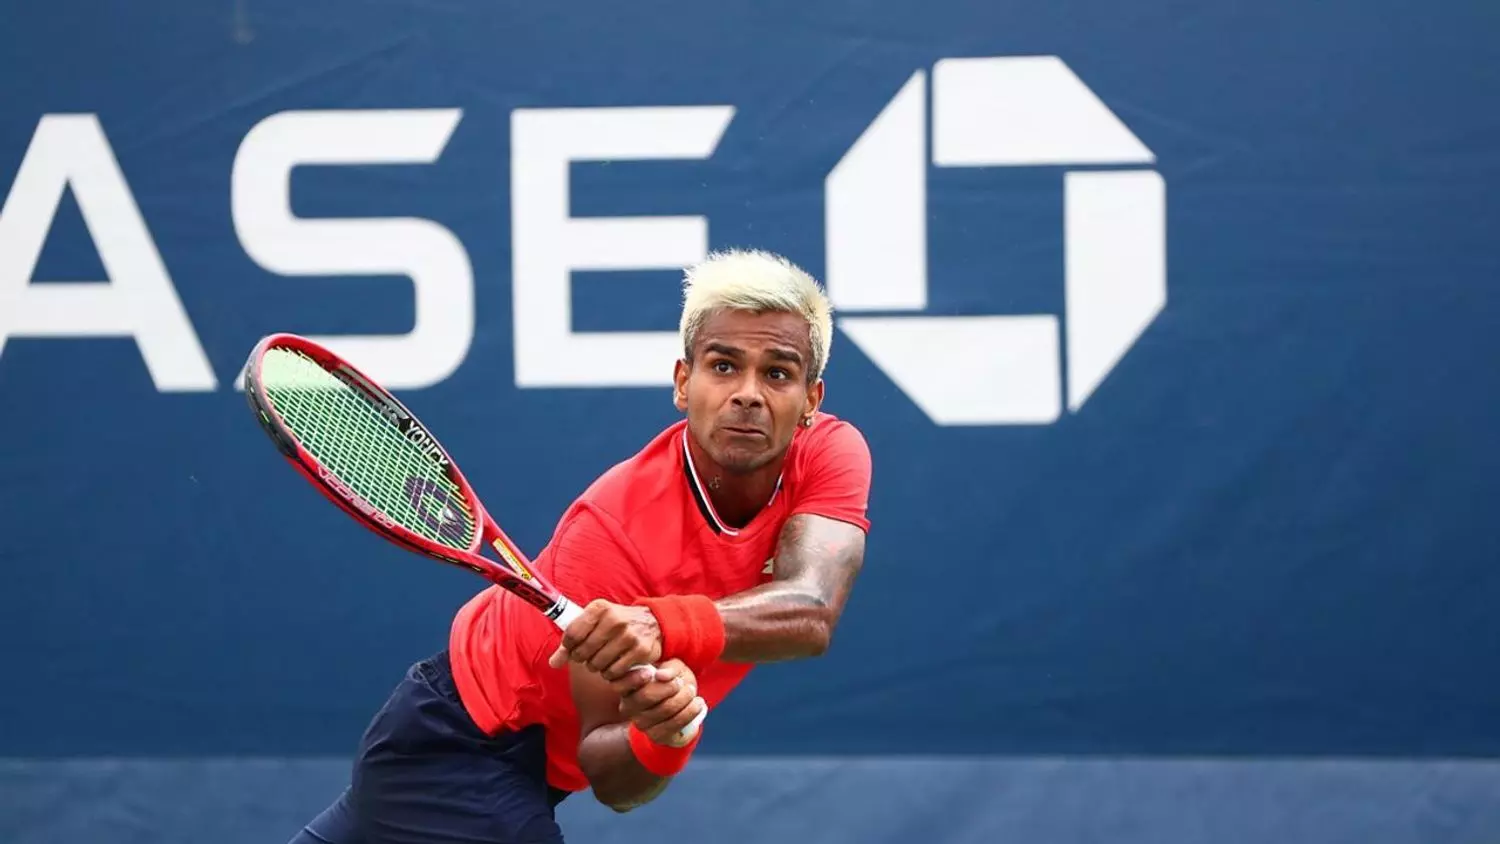 Tokyo Olympics Tennis Day 1, July 24 - Sumit Nagal to headline first round action